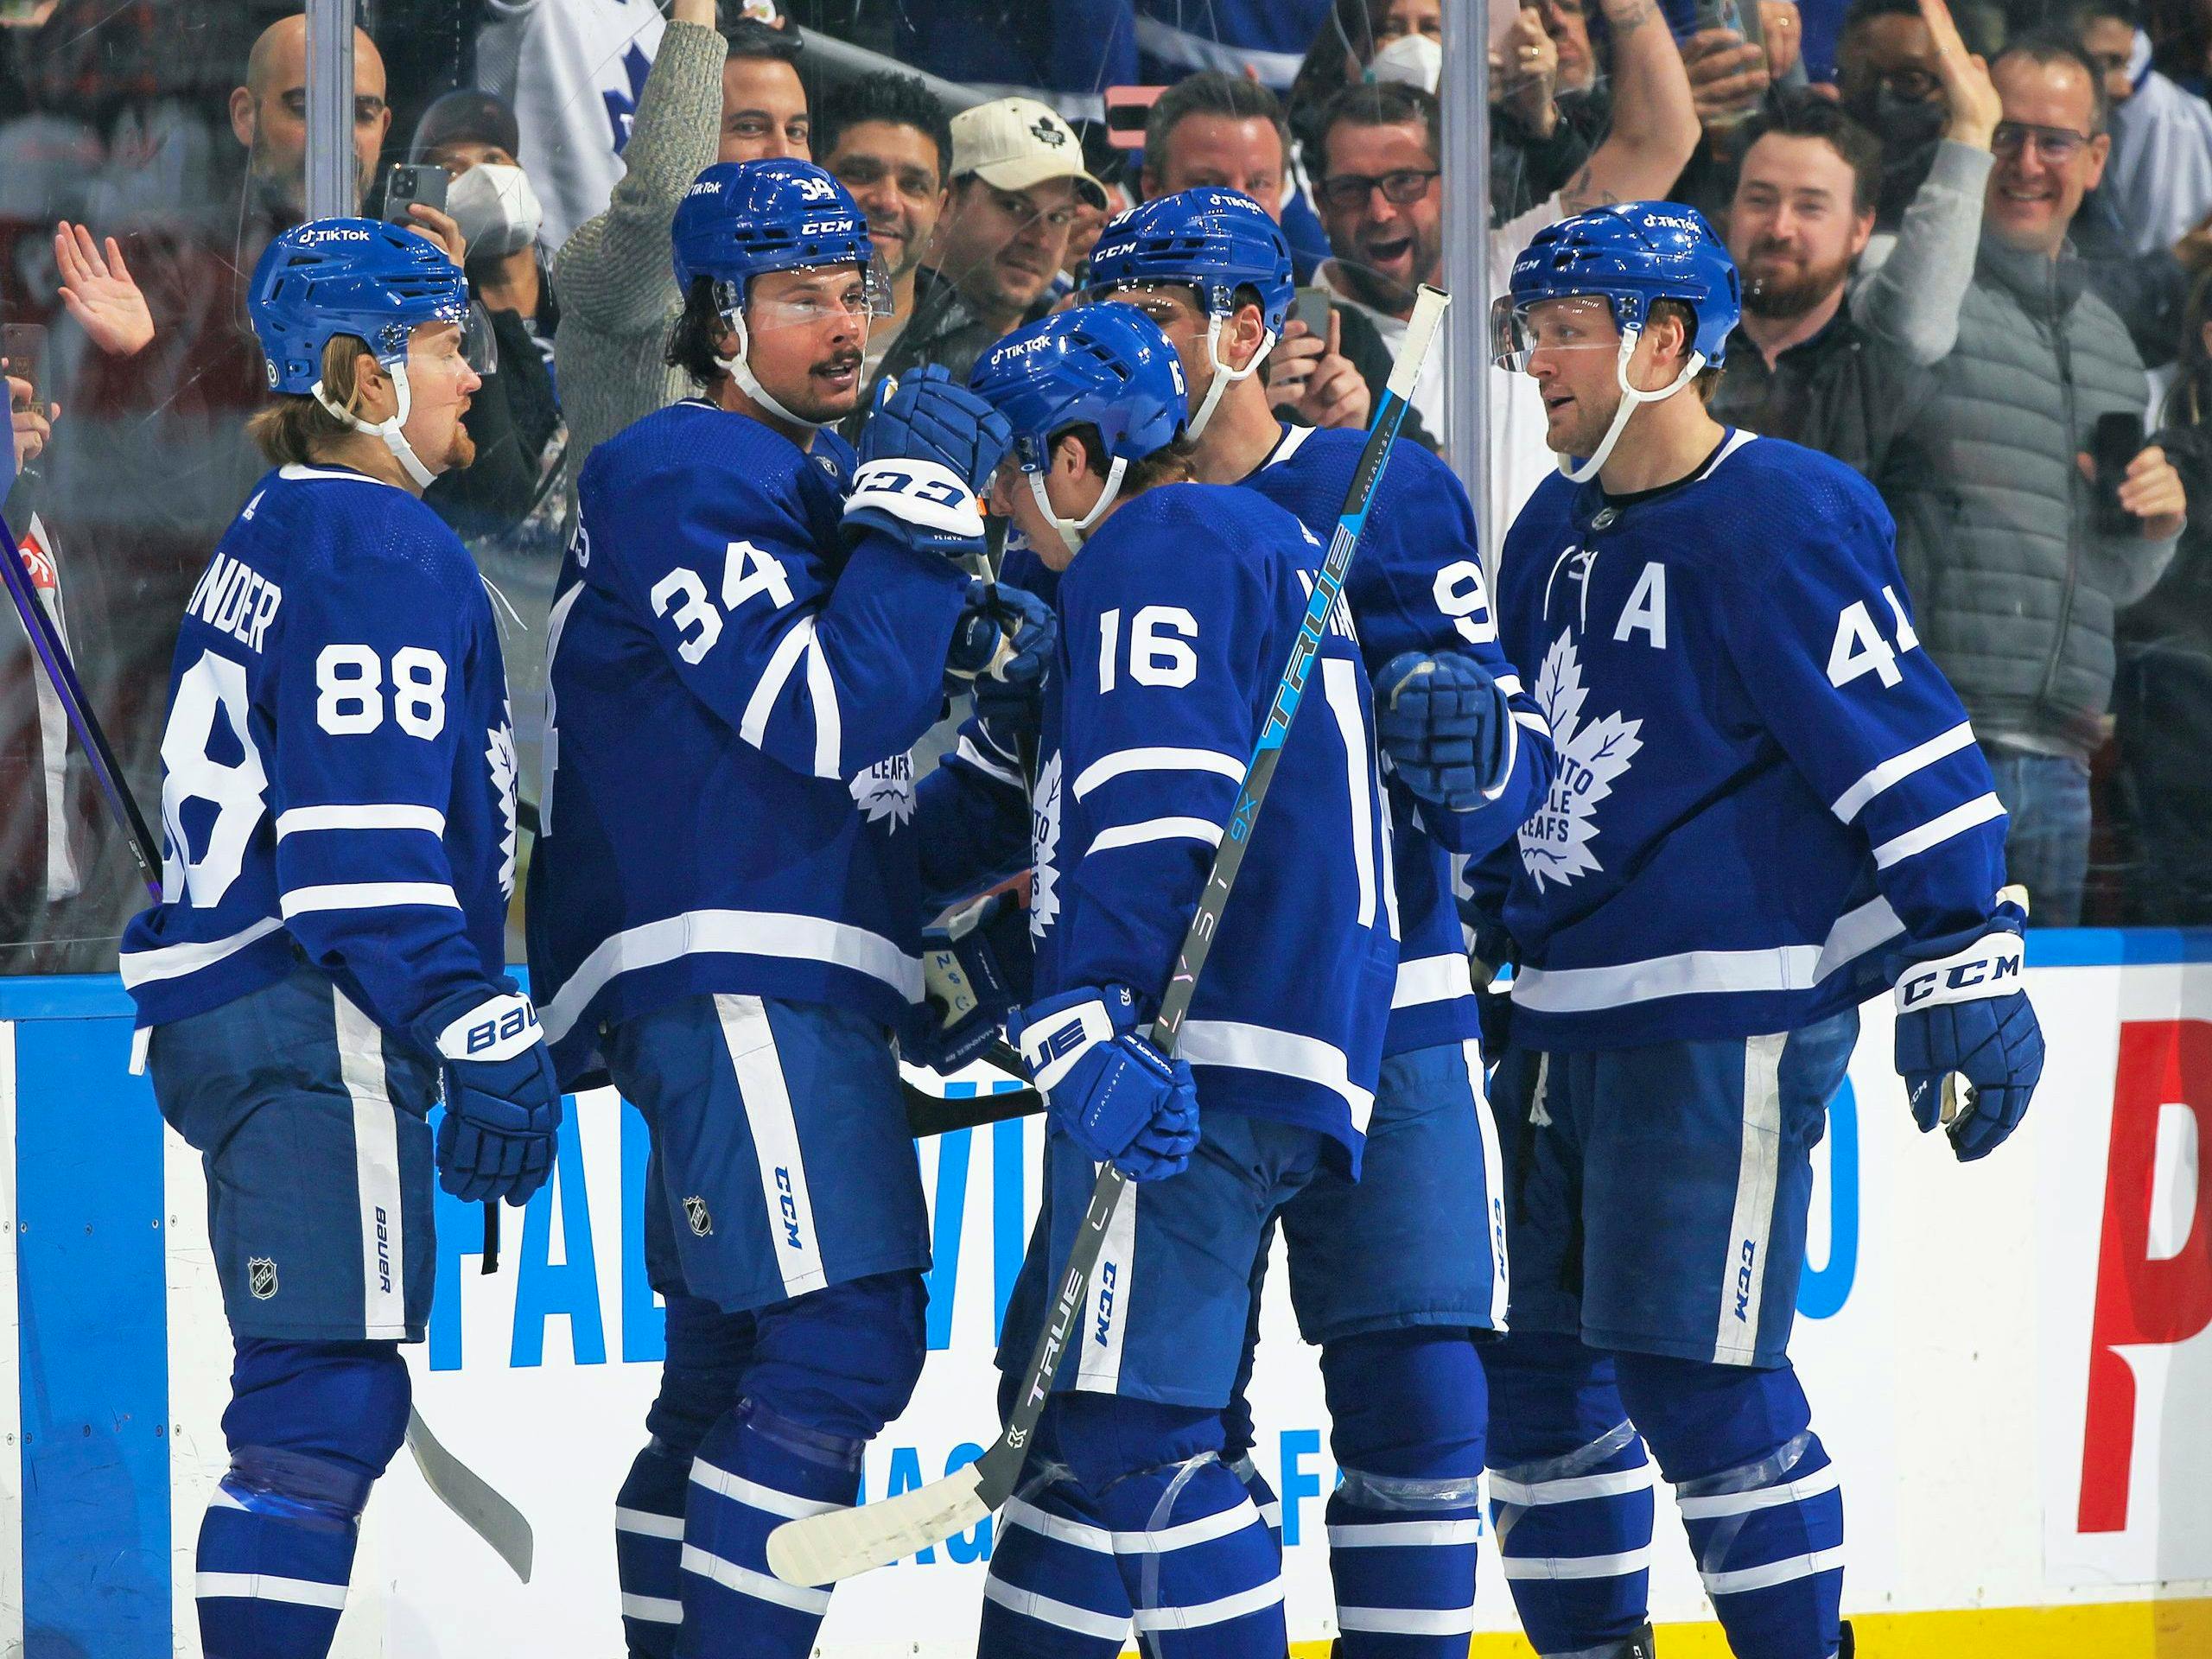 Maple Leafs will play another 10 home games before SBA is full again